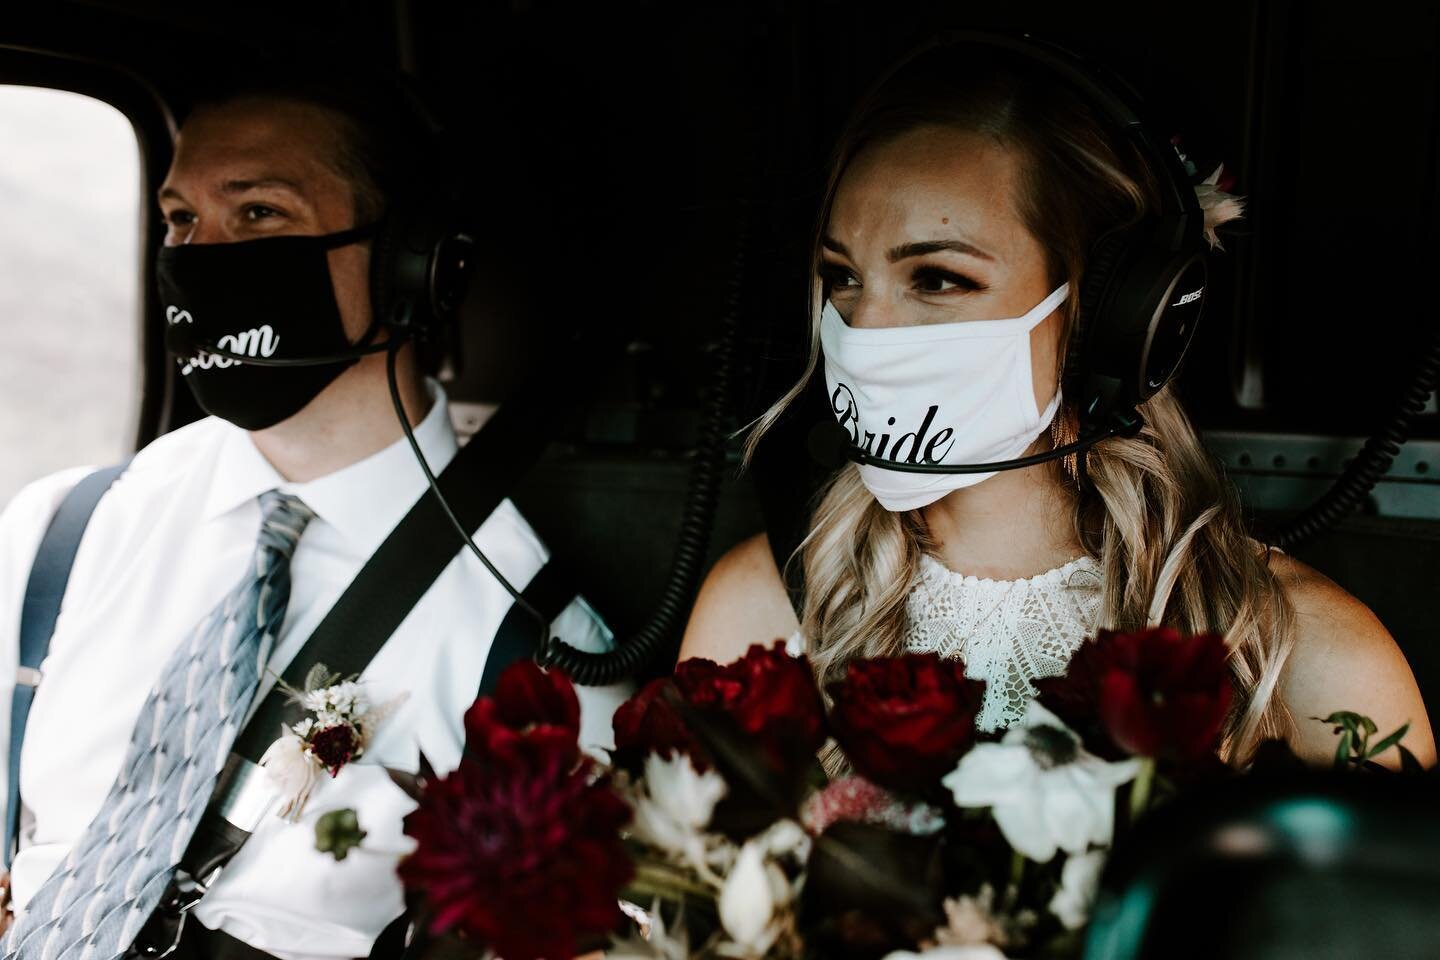 Juicy red tones with pops of white for this beautiful, and COVID conscious, bride and groom on their elopement day! 
Who says masks can&rsquo;t be cute?! 
Photographer: @sarah.french.photo 
Transportation: @flyalphaair @alaskahelicoptertours
Planner: